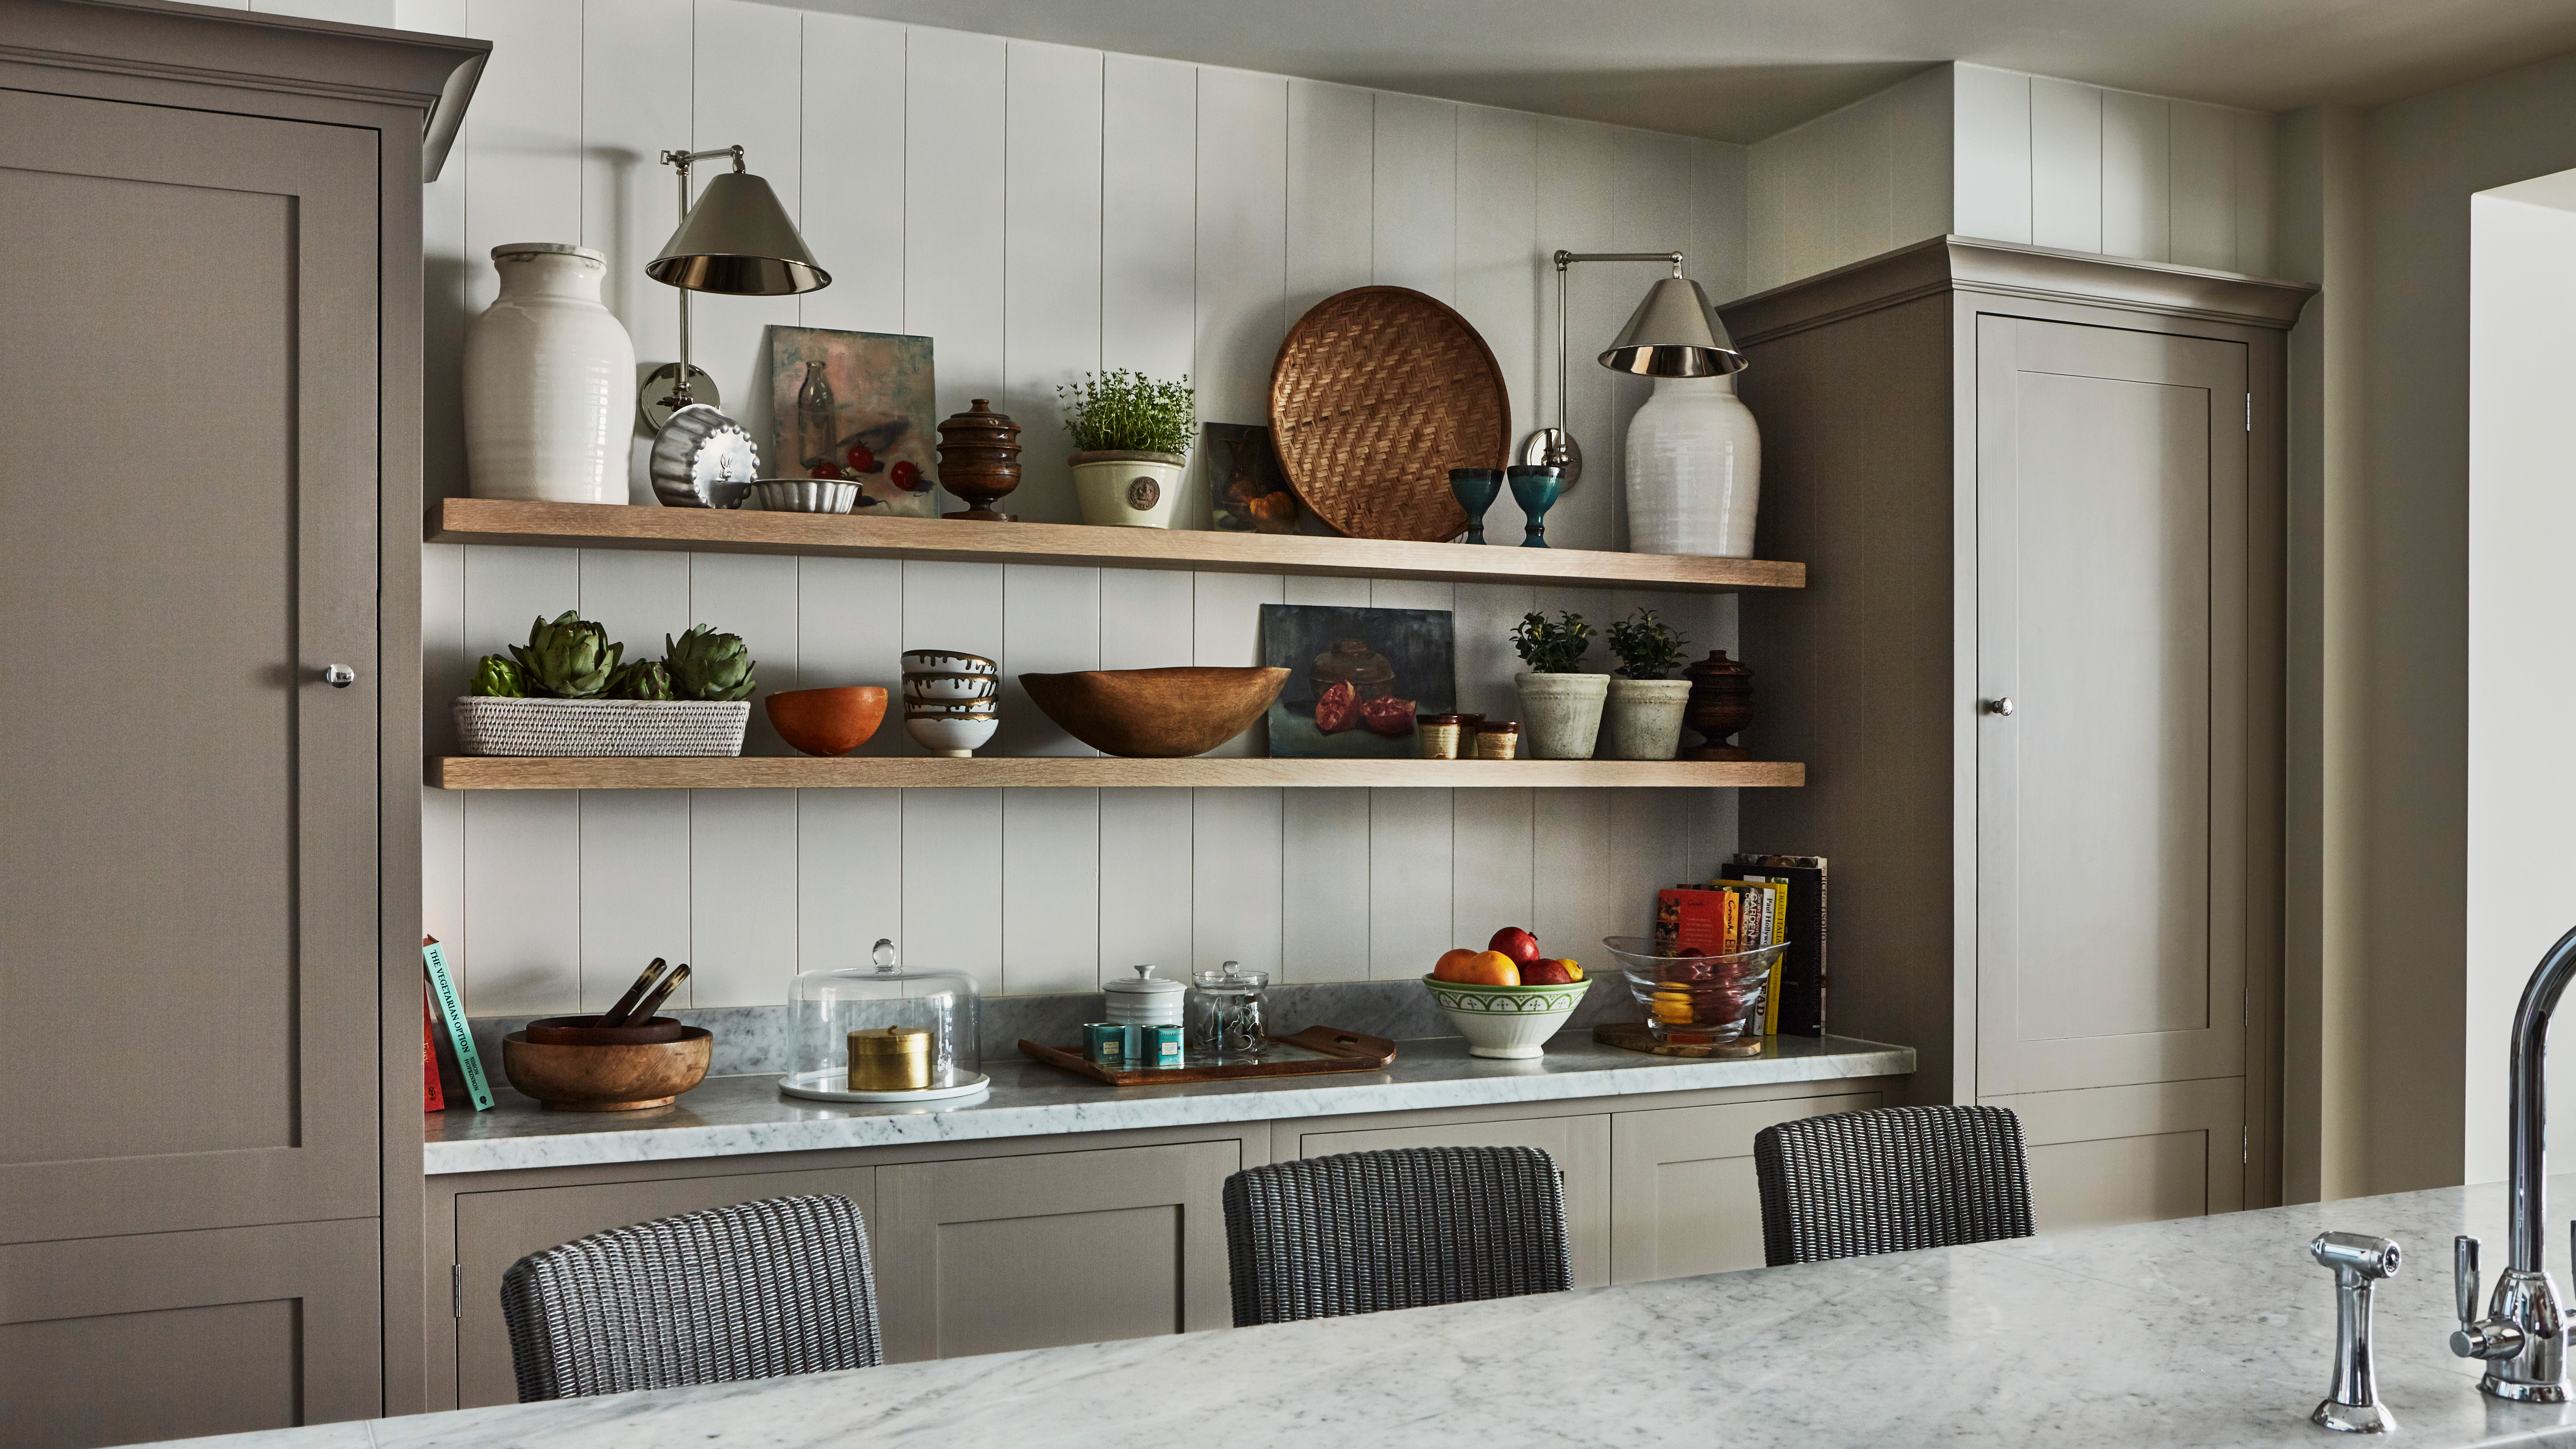 Kitchen shelving ideas 20 ways to boost storage and display space ...